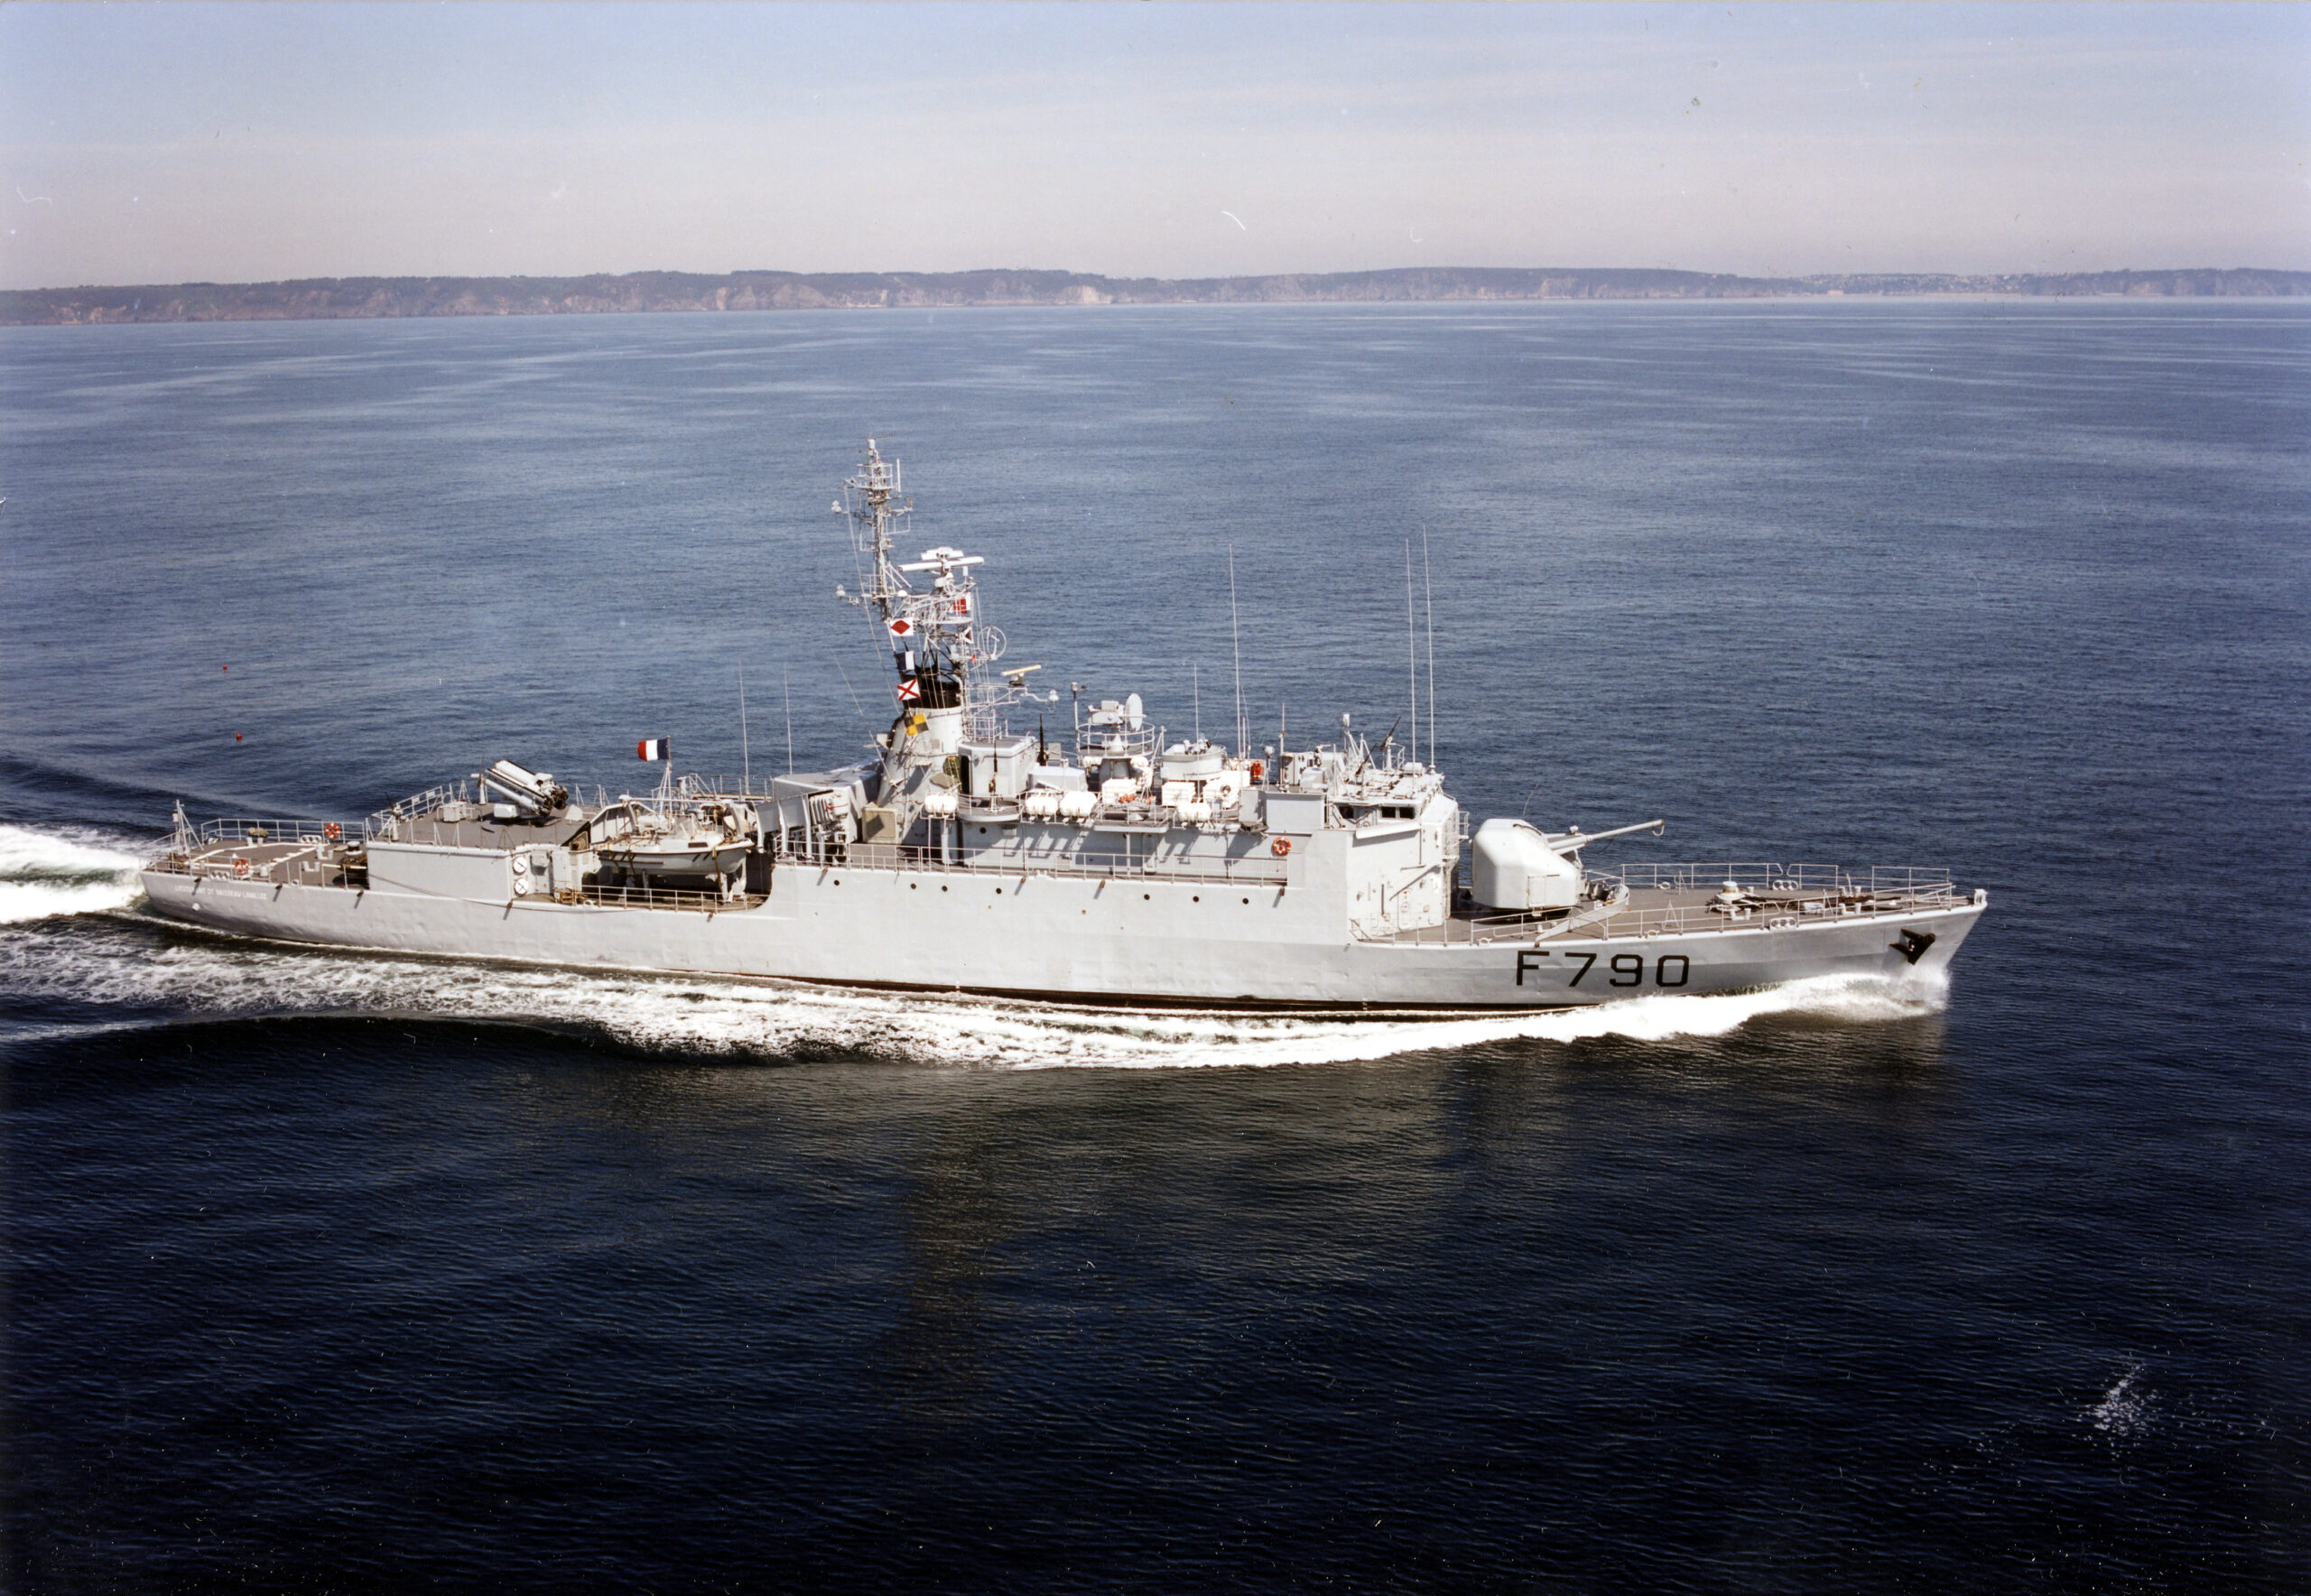 A photo of the French Navy's aviso Lieutenant de vaisseau Lavallée ship. The ship, painted light grey, is sailing in deep blue waters. A fair, cloudless sky acts as the background.